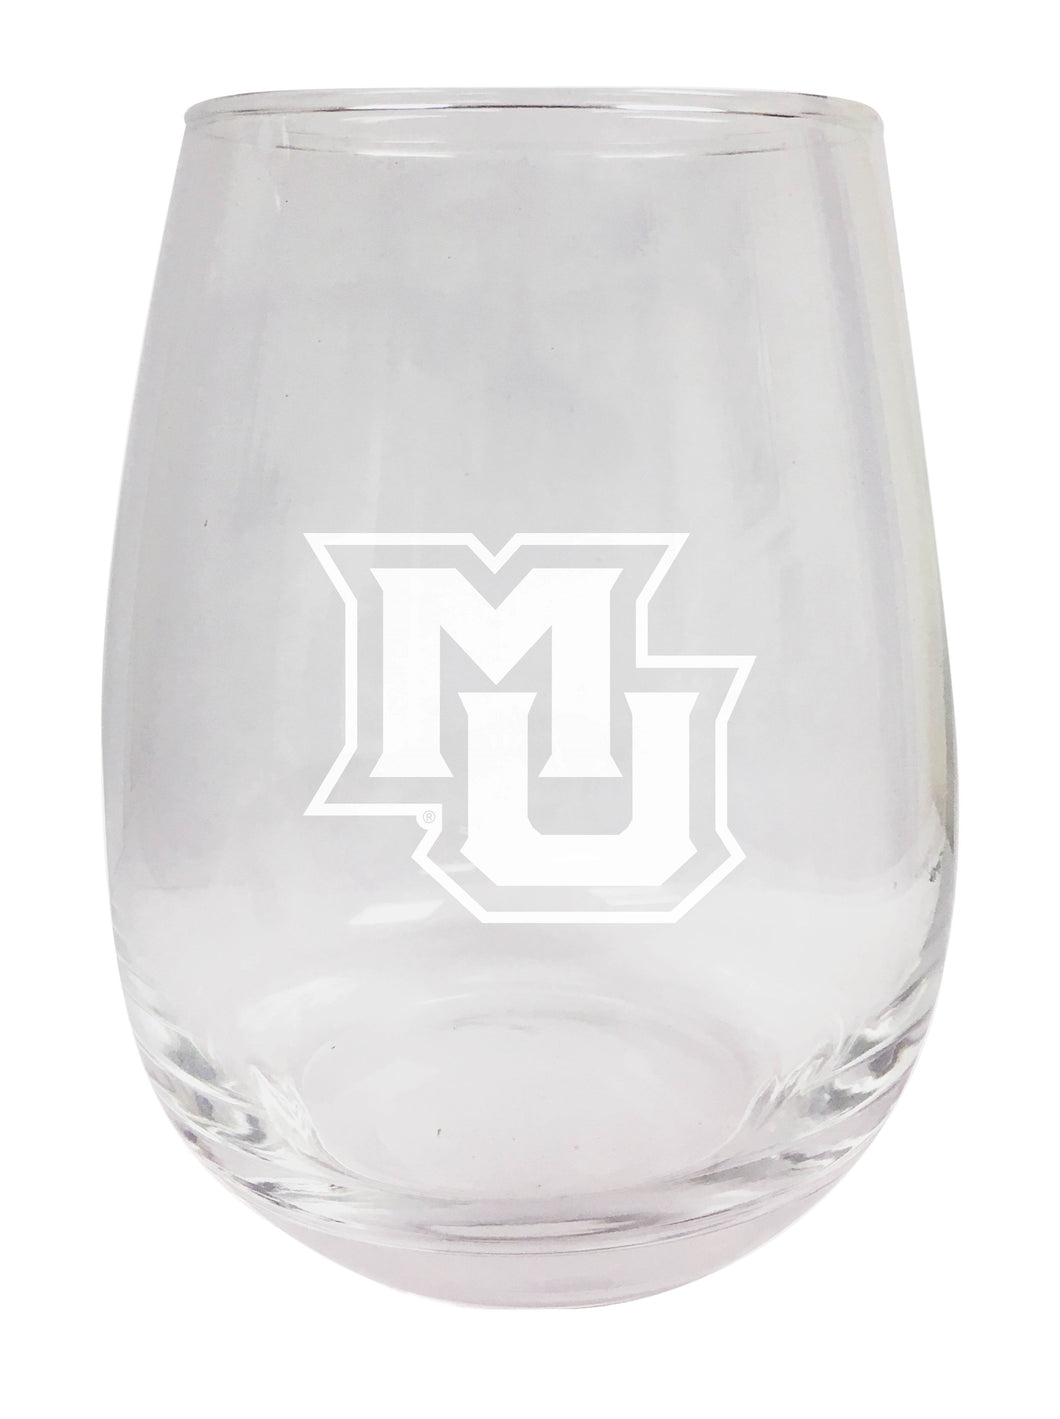 Marquette Golden Eagles NCAA 15 oz Laser-Engraved Stemless Wine Glass - Perfect for Alumni & Fans